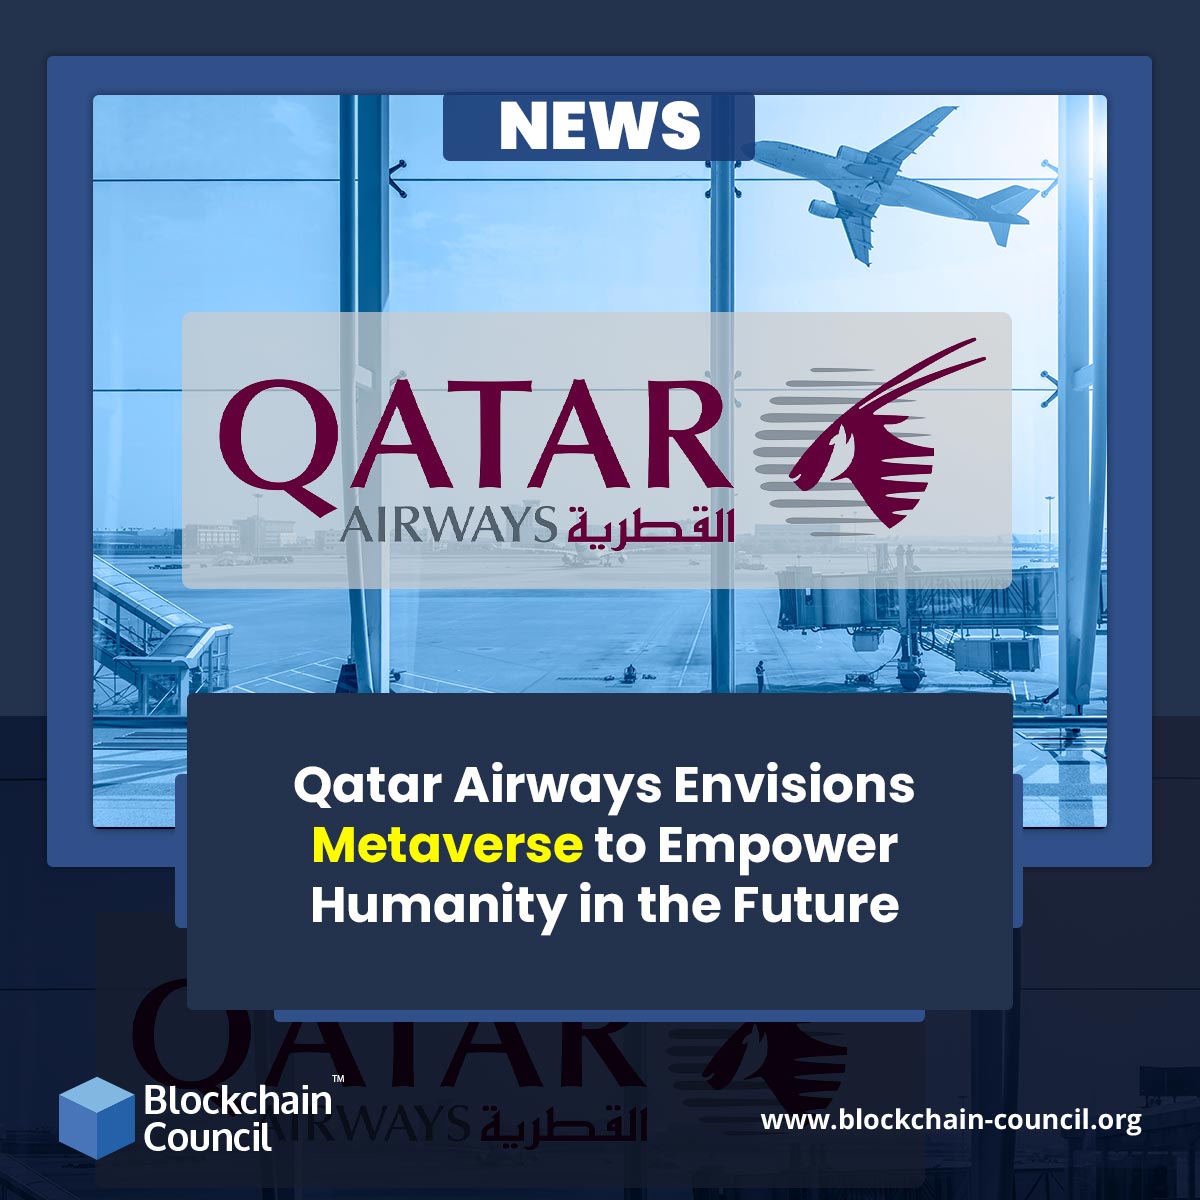 Qatar Airways Envisions Metaverse to Empower Humanity in the Future